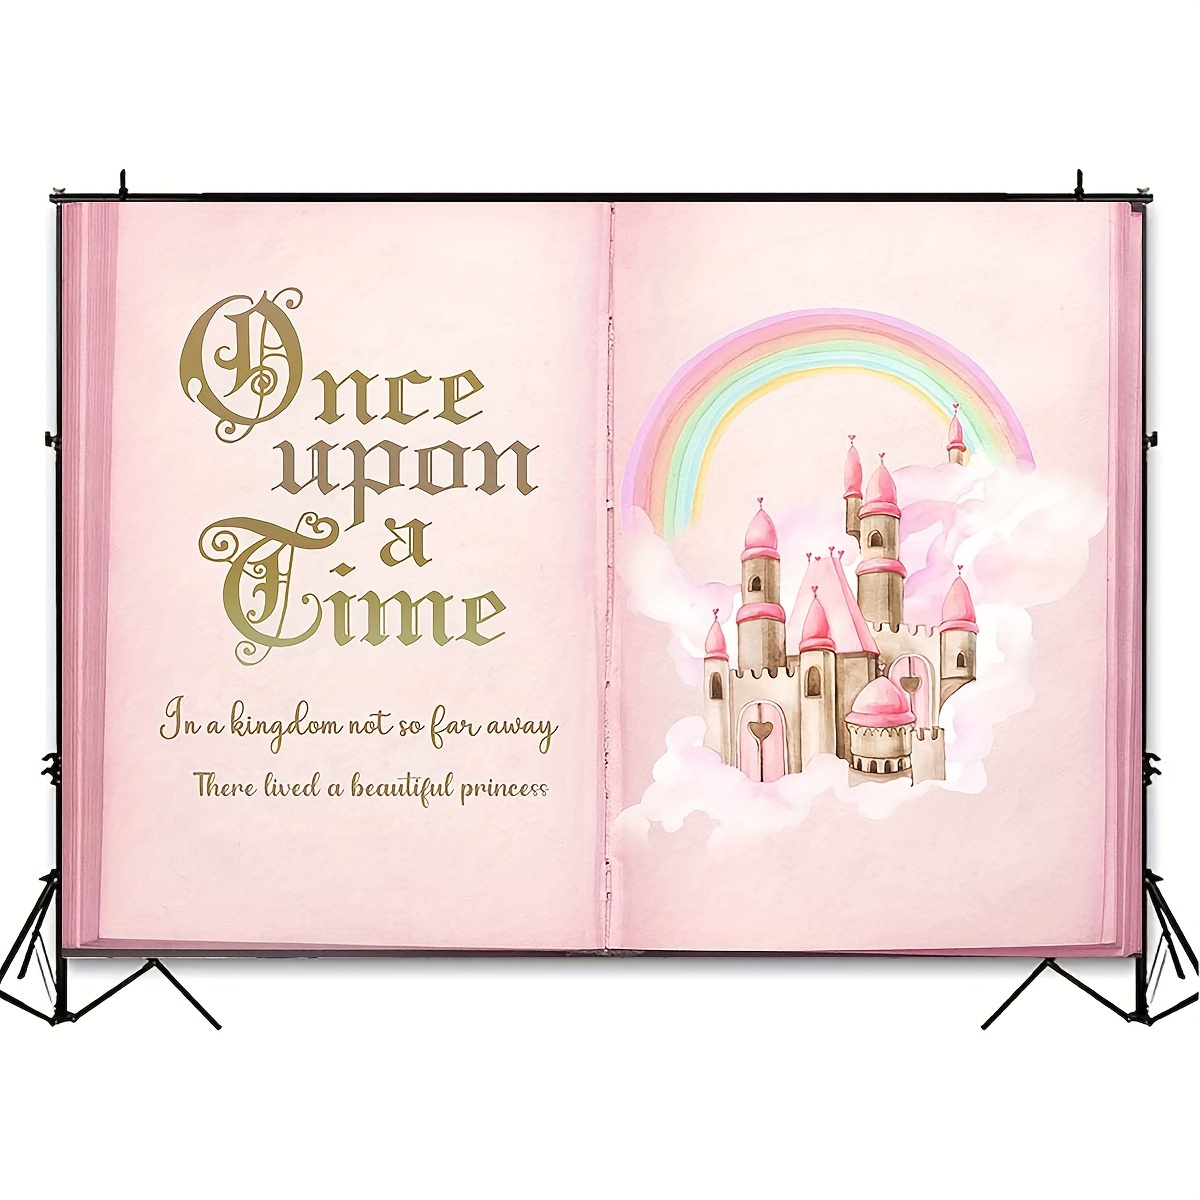 1pc once upon a time backdrop pink fairytale castle giant book rainbow photography background girls princess birthday party photobooth backdrops supplies cake table decorations banner decorations